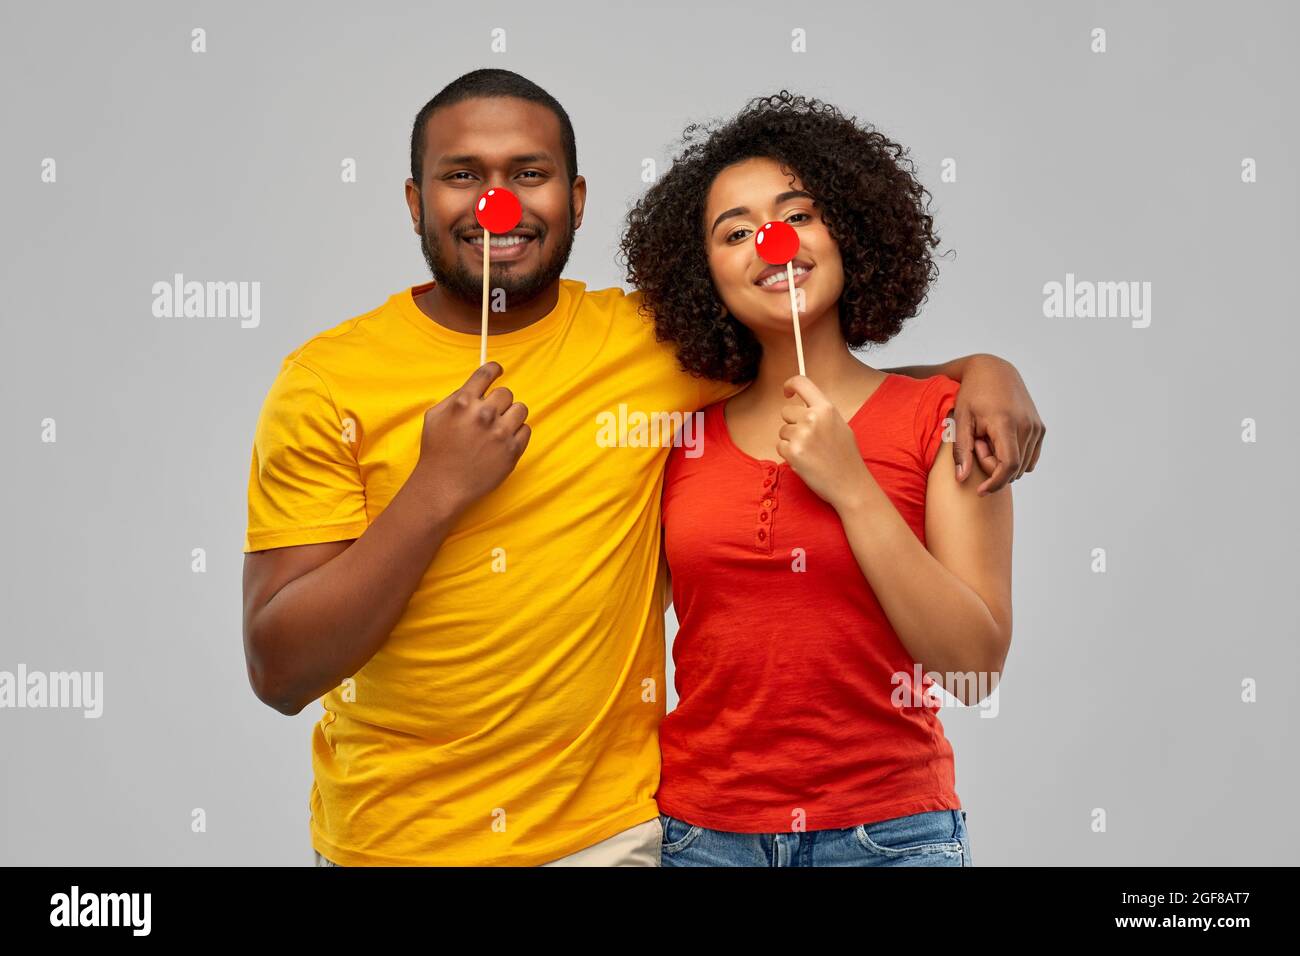 happy african american couple with red clawn noses Stock Photo